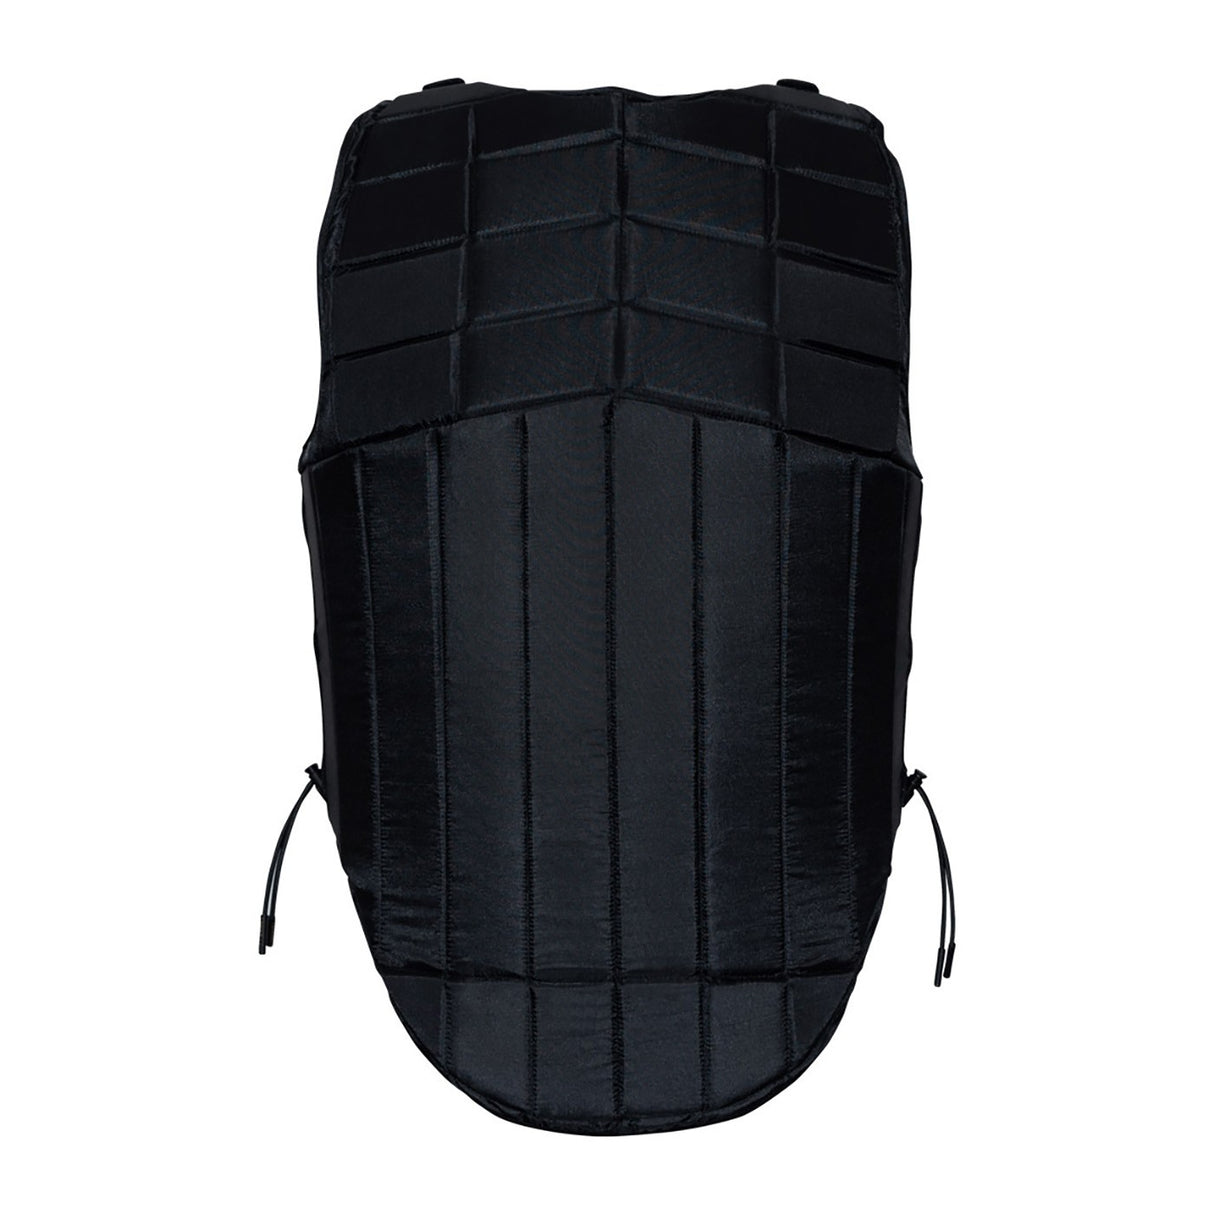 Tipperary Contender ASTM Body Protector